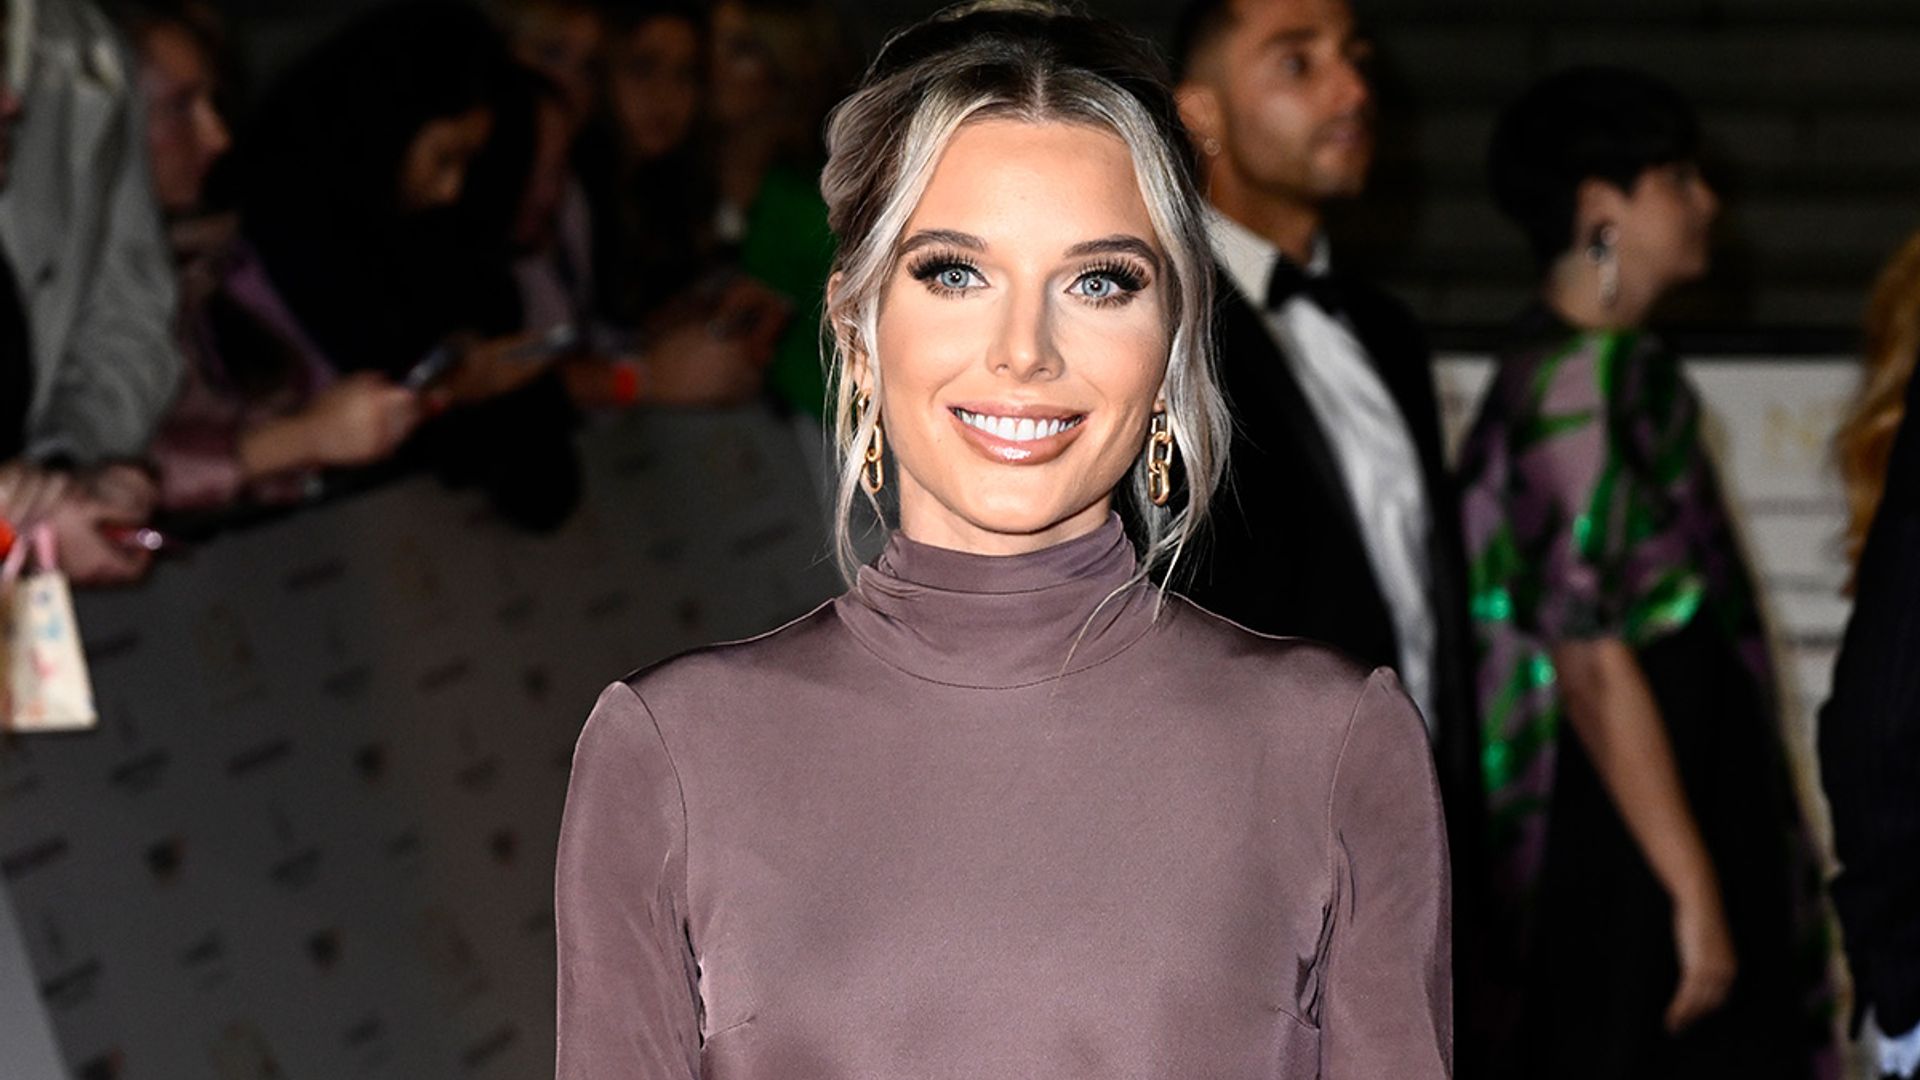 Helen Flanagan steals the show in skin-baring gown – and wow